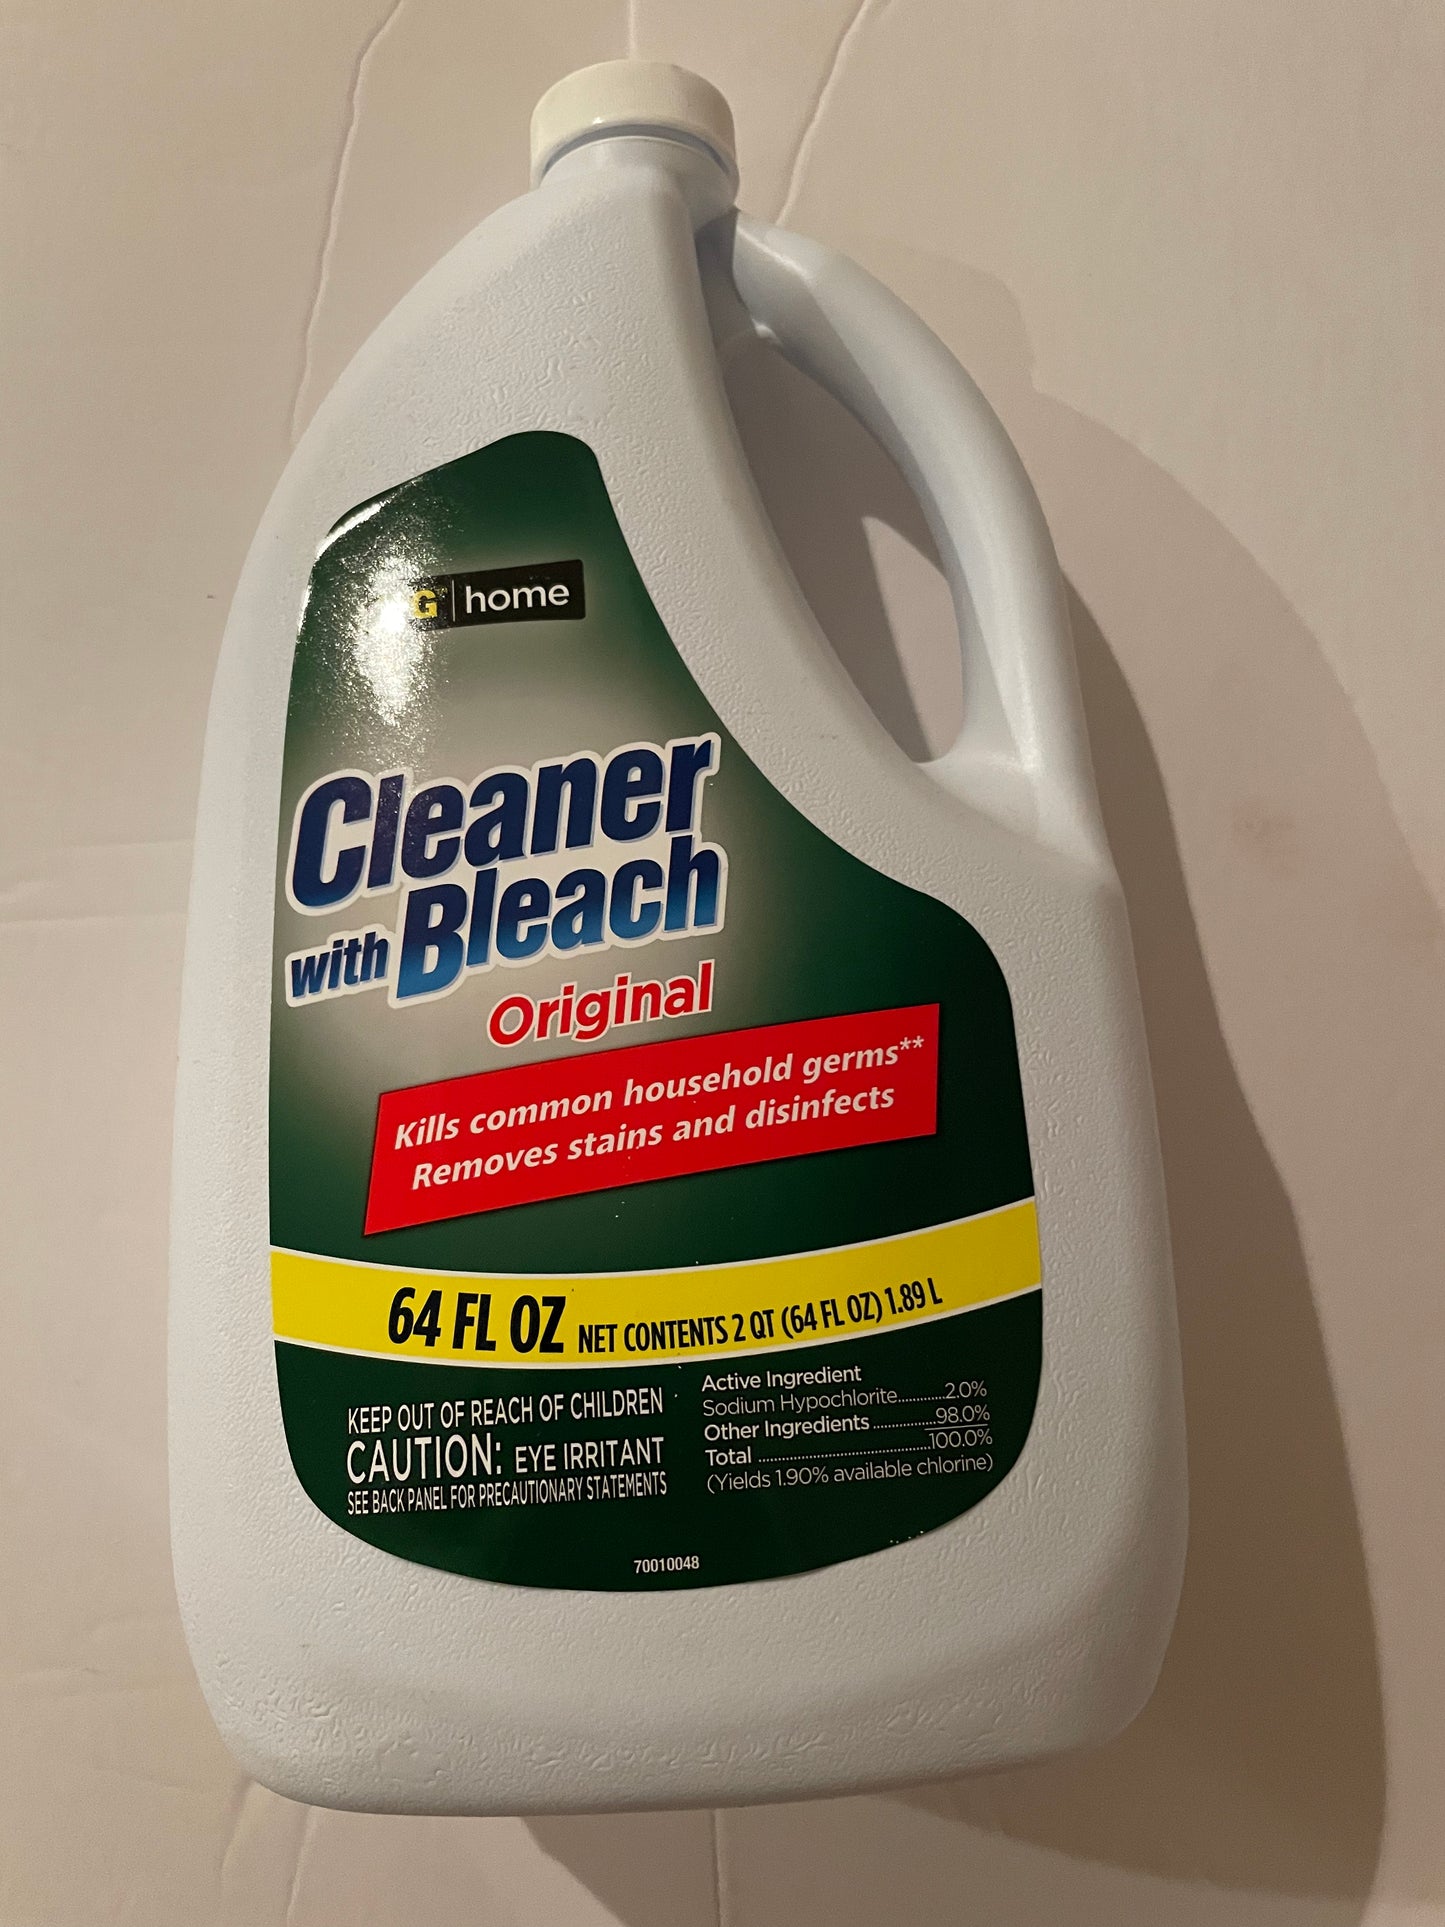 Household, Cleaner With Bleach